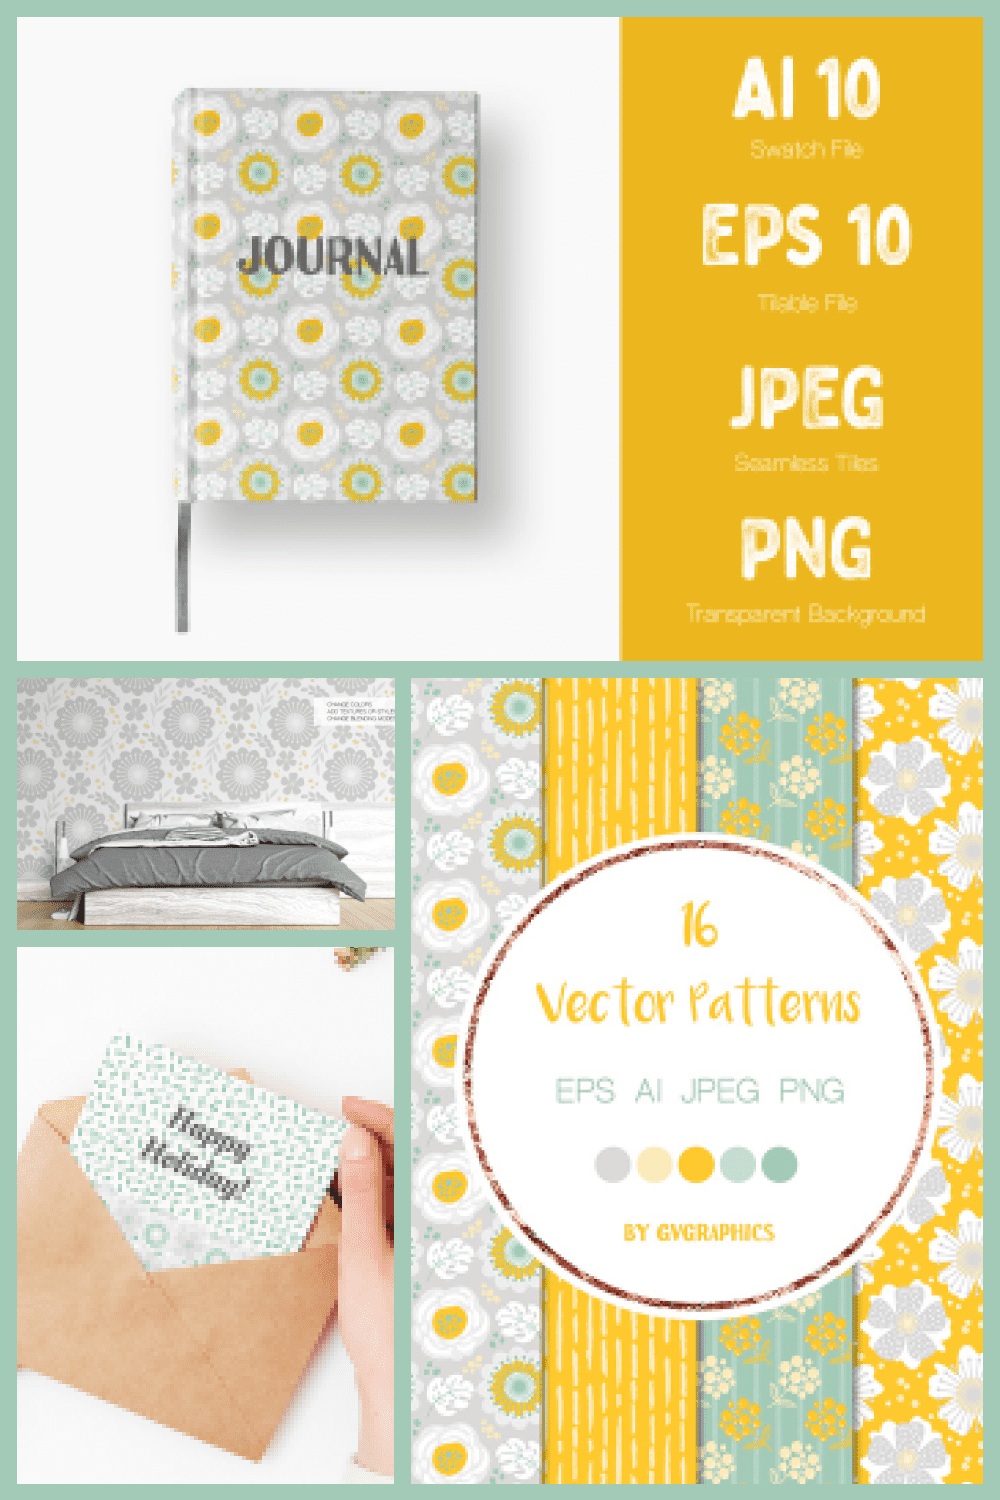 Gray, Yellow and Green Nature Vector Patterns - MasterBundles - Pinterest Collage Image.